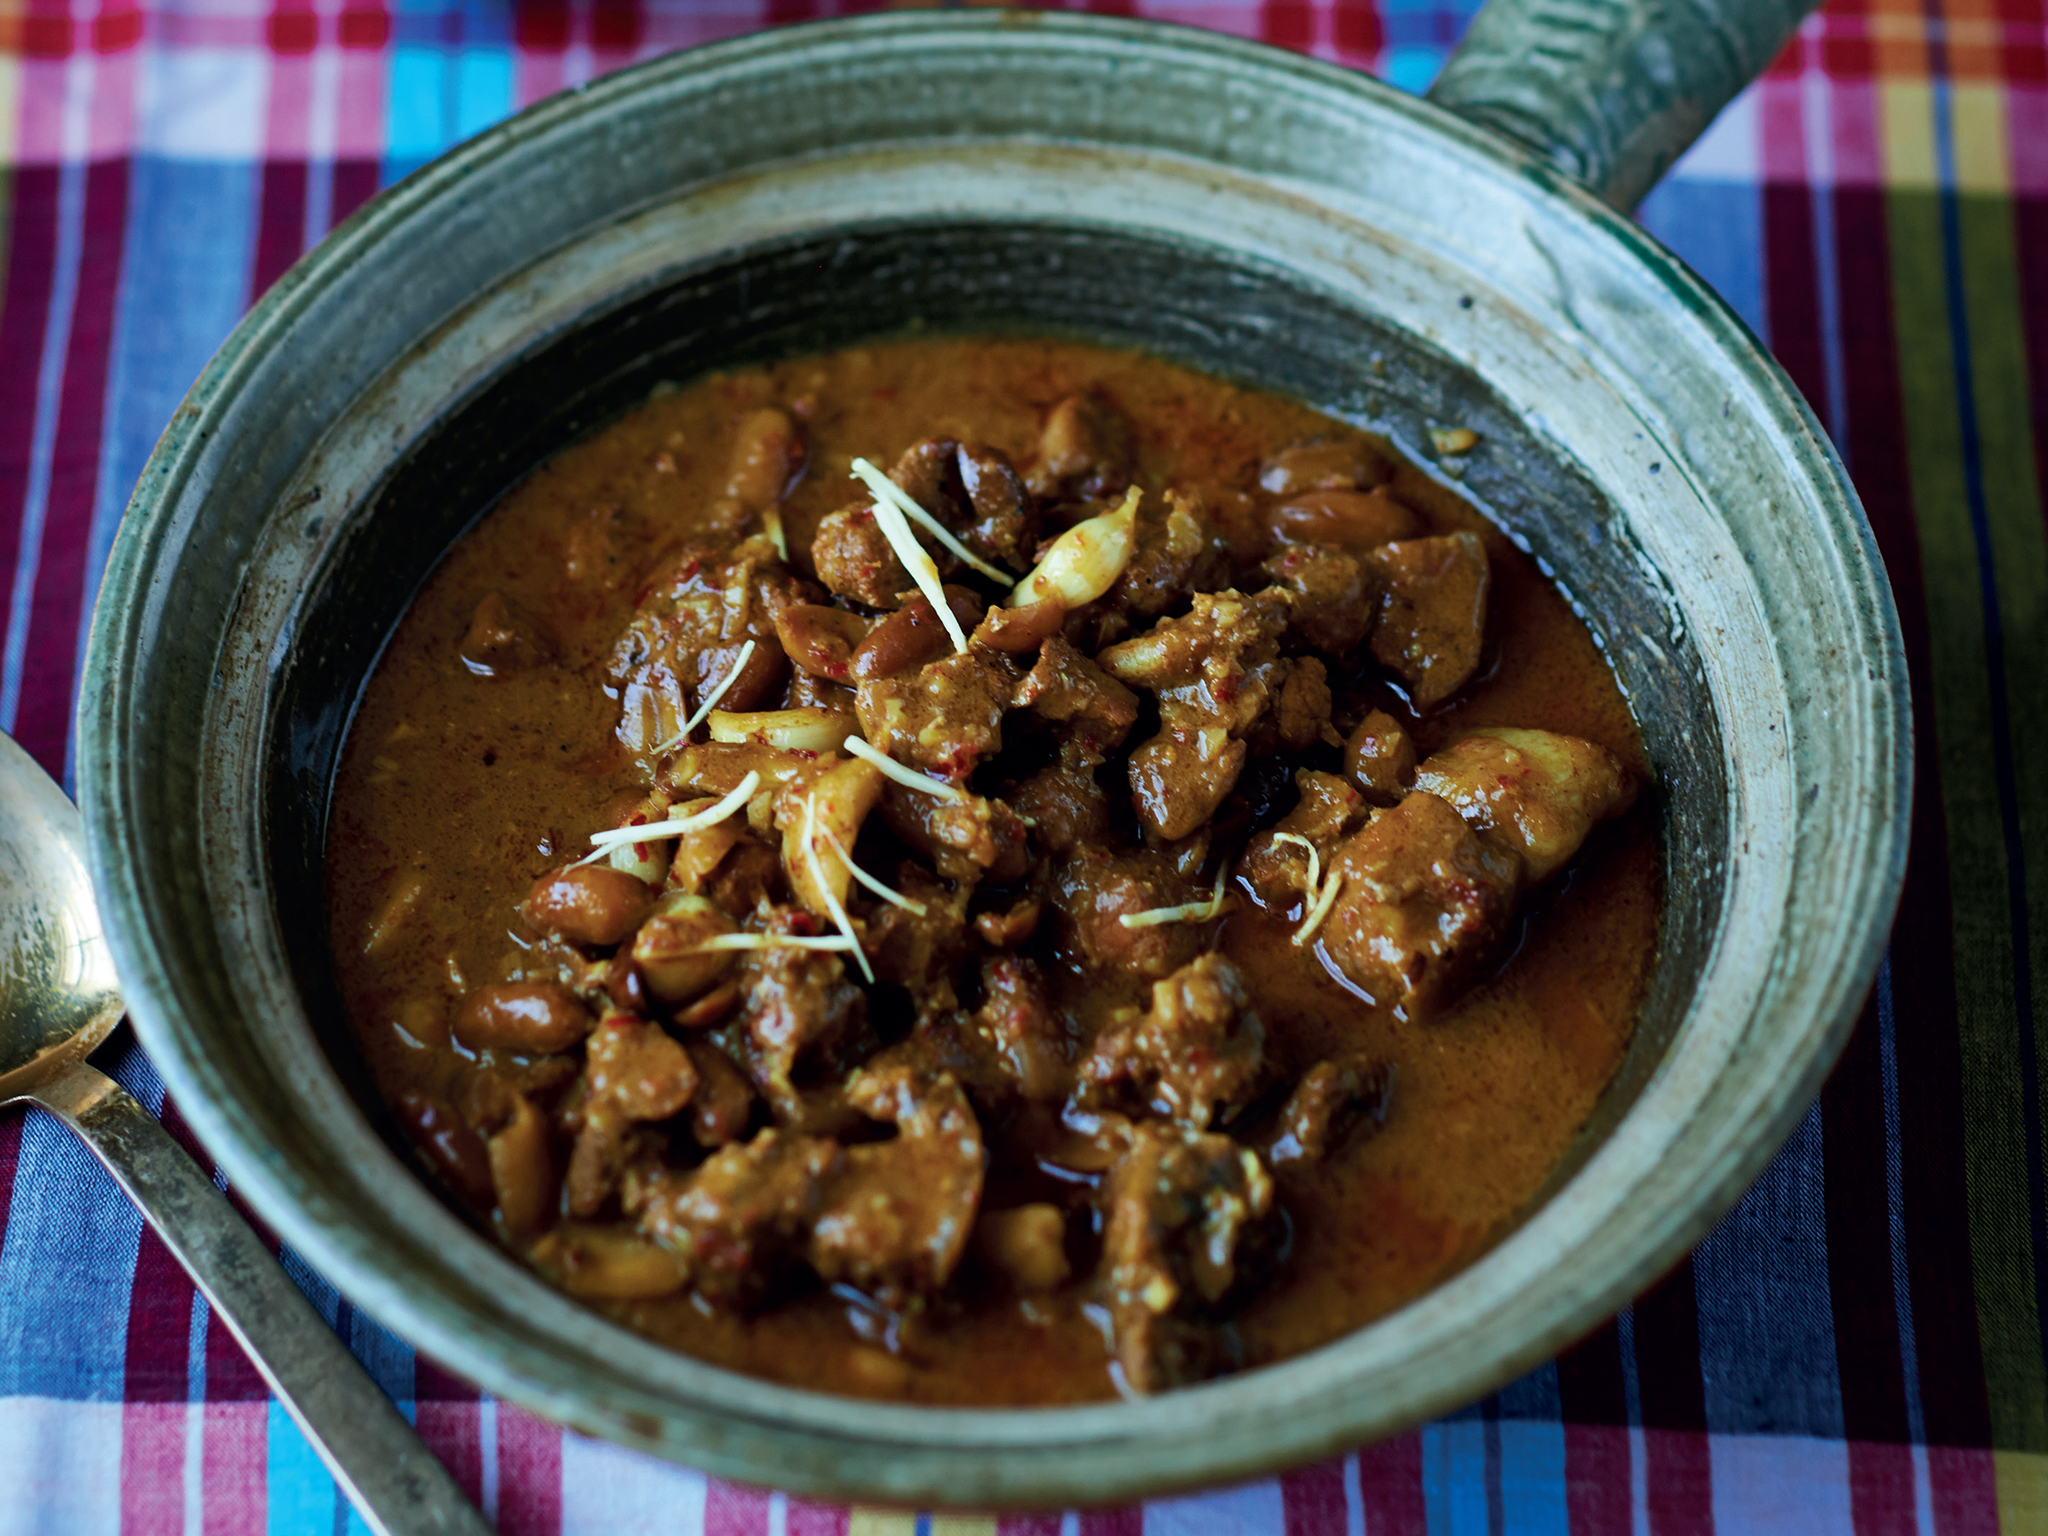 This pork curry uses two cuts of the meat and a Burmese masala powder to flavour